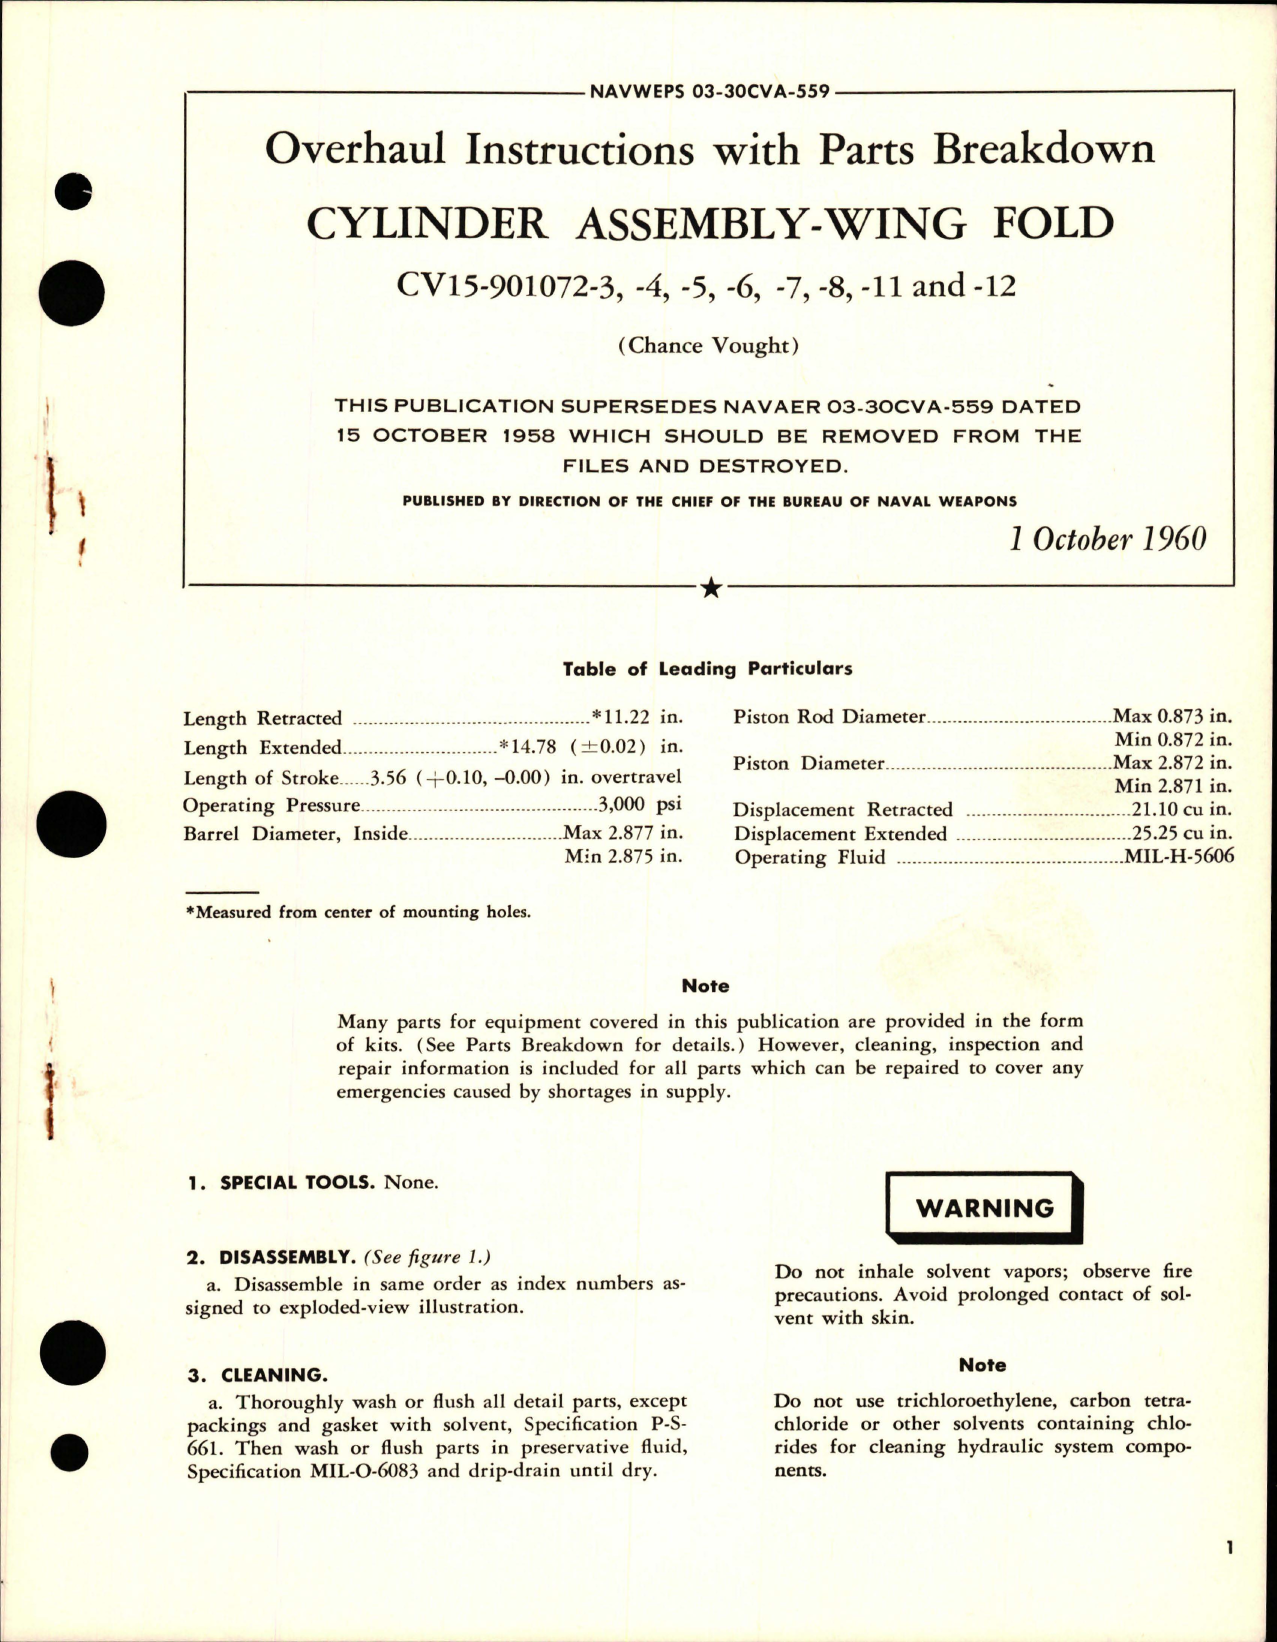 Sample page 1 from AirCorps Library document: Overhaul Instructions with Parts Breakdown for Wing Fold Cylinder Assembly 